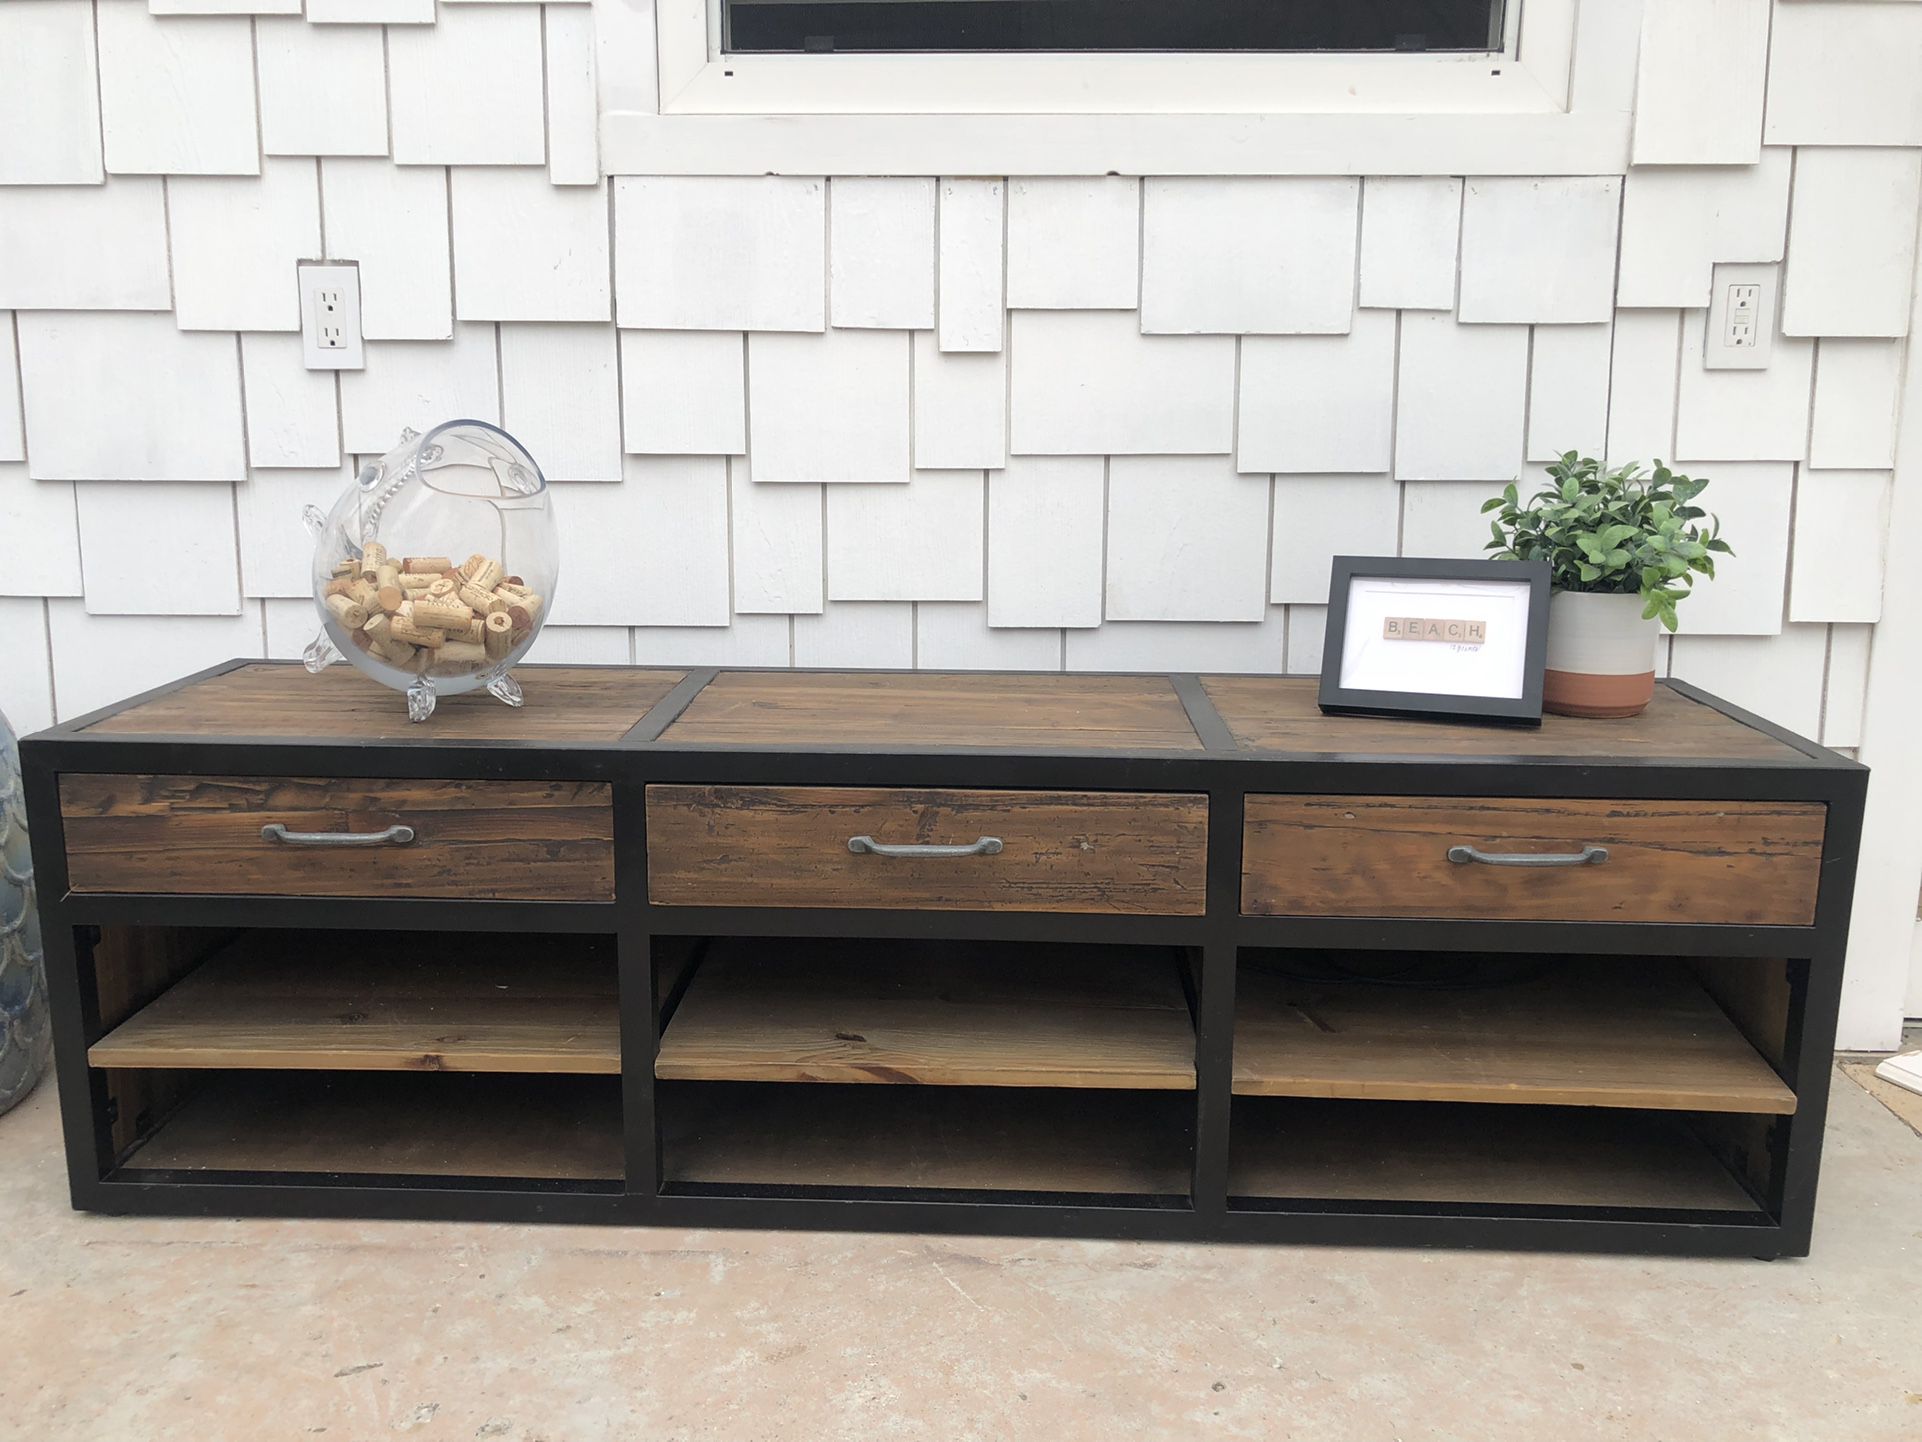 Steel Framed Console With Industrial Vibe